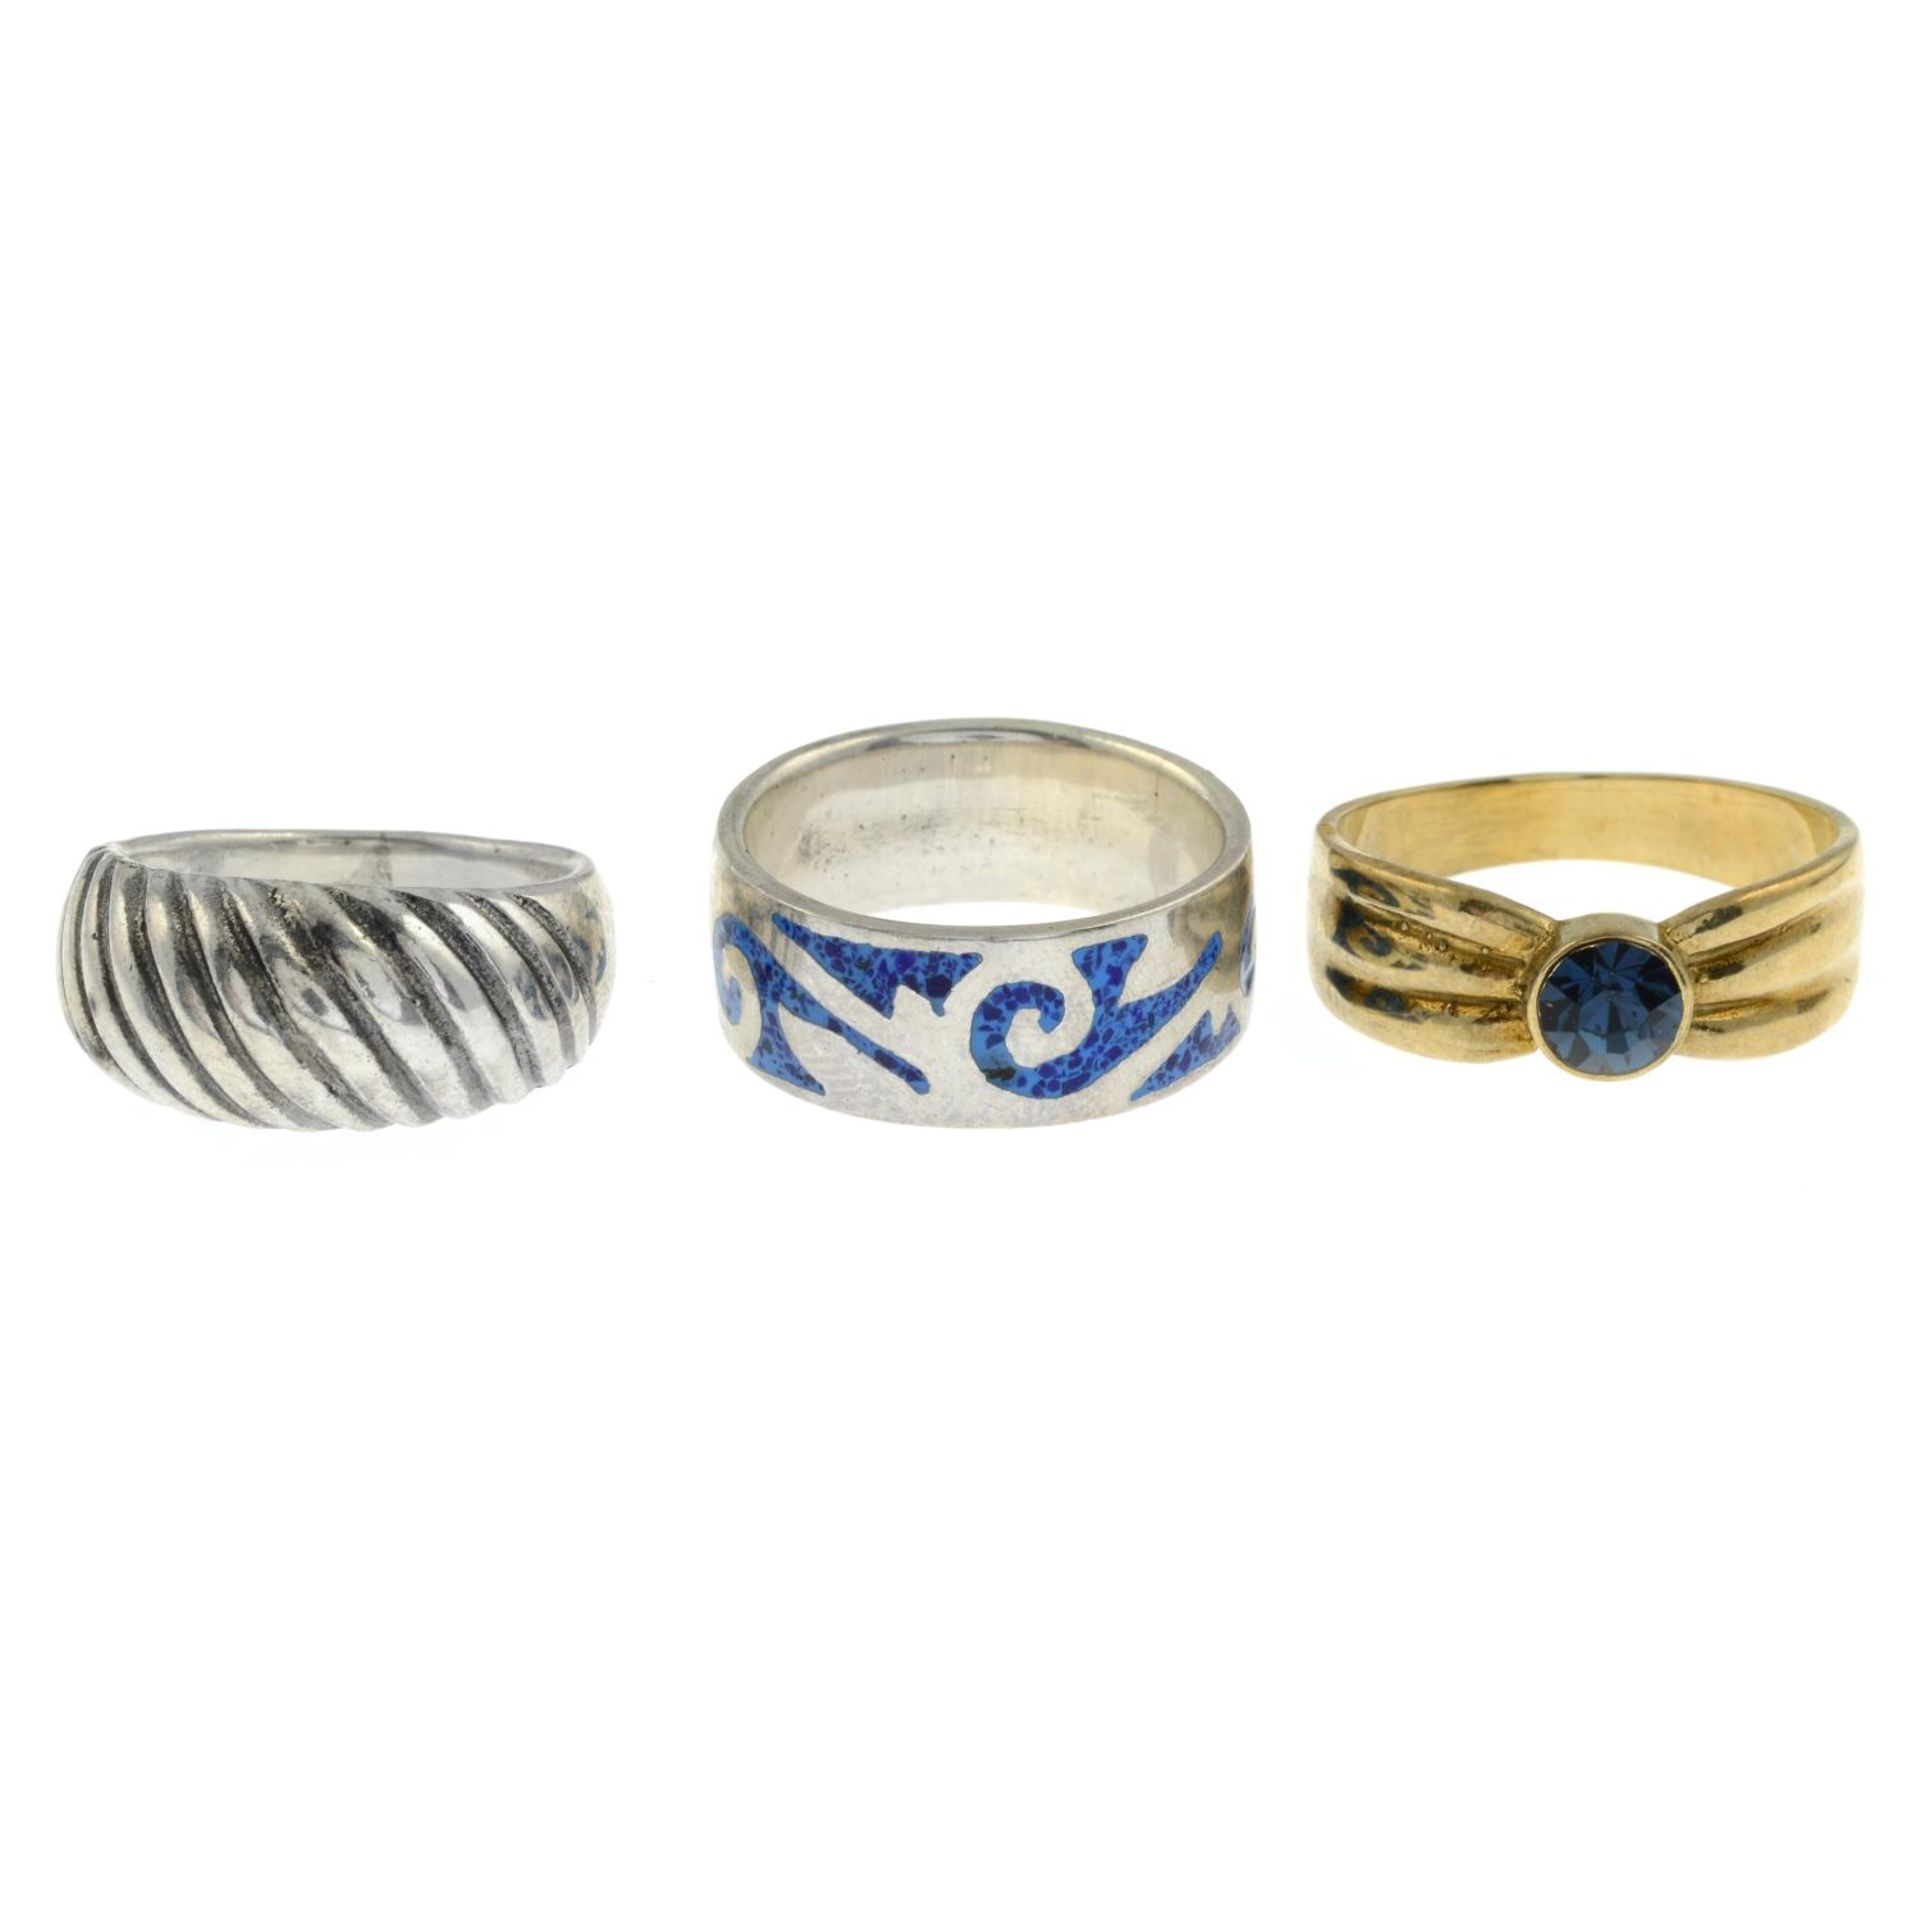 A selection of enamel and gem-set rings.Many with marks to indicate silver.